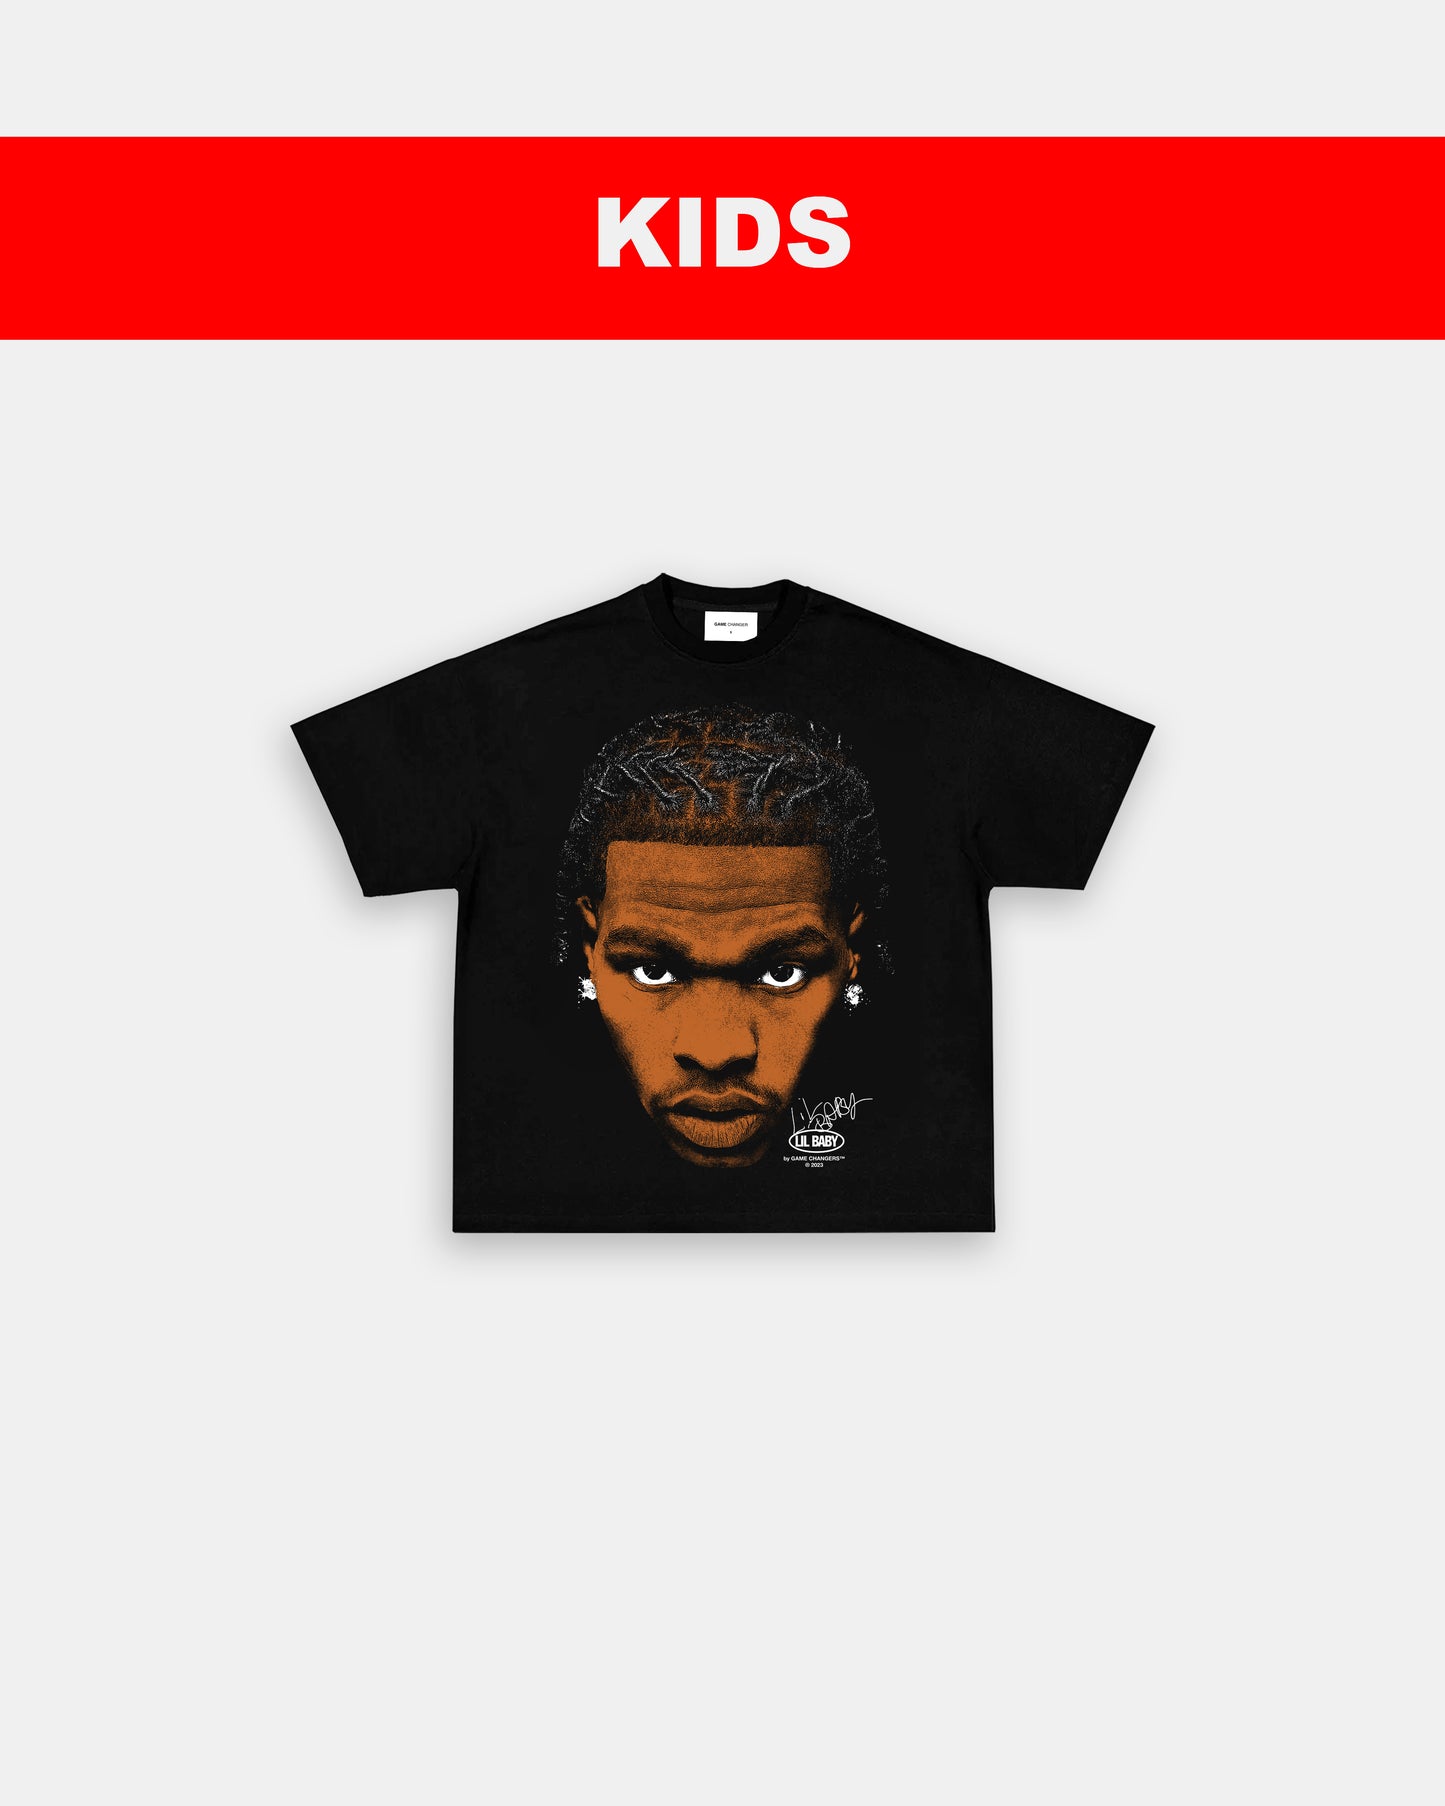 BIG FACE LIL BABY - KIDS TEE